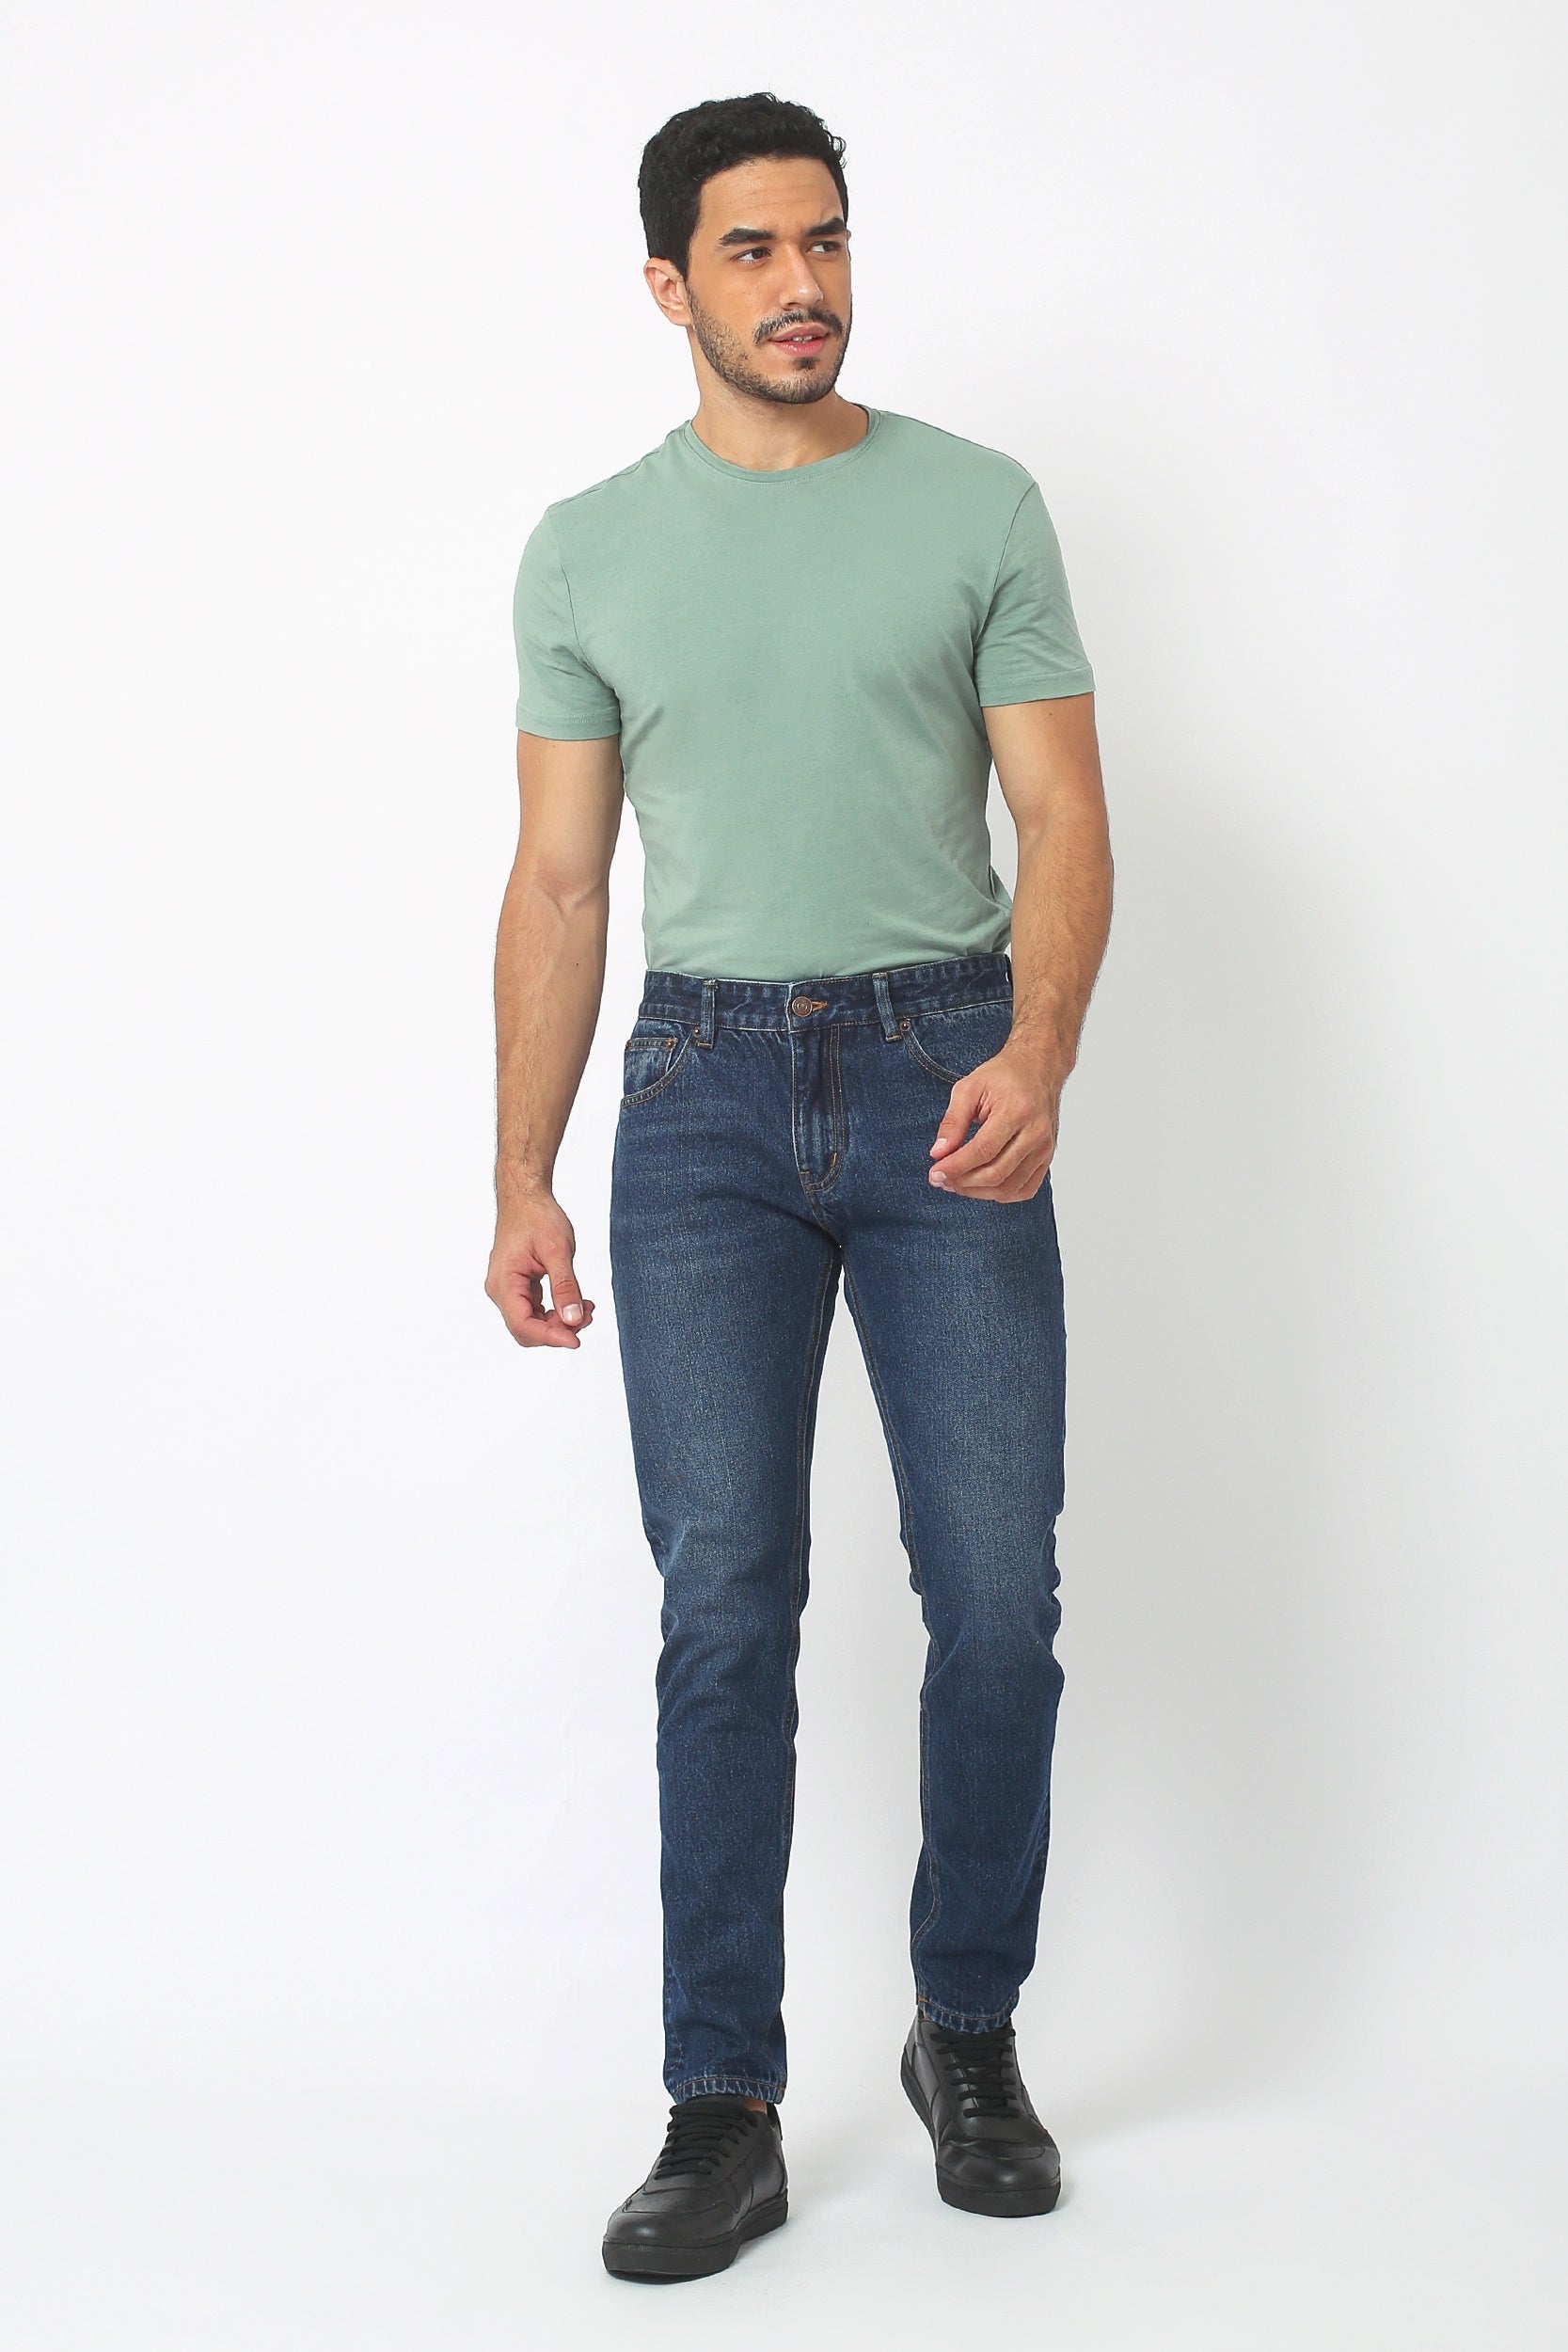 Buy Washed Tapered Fit Jeans at Amazon.in